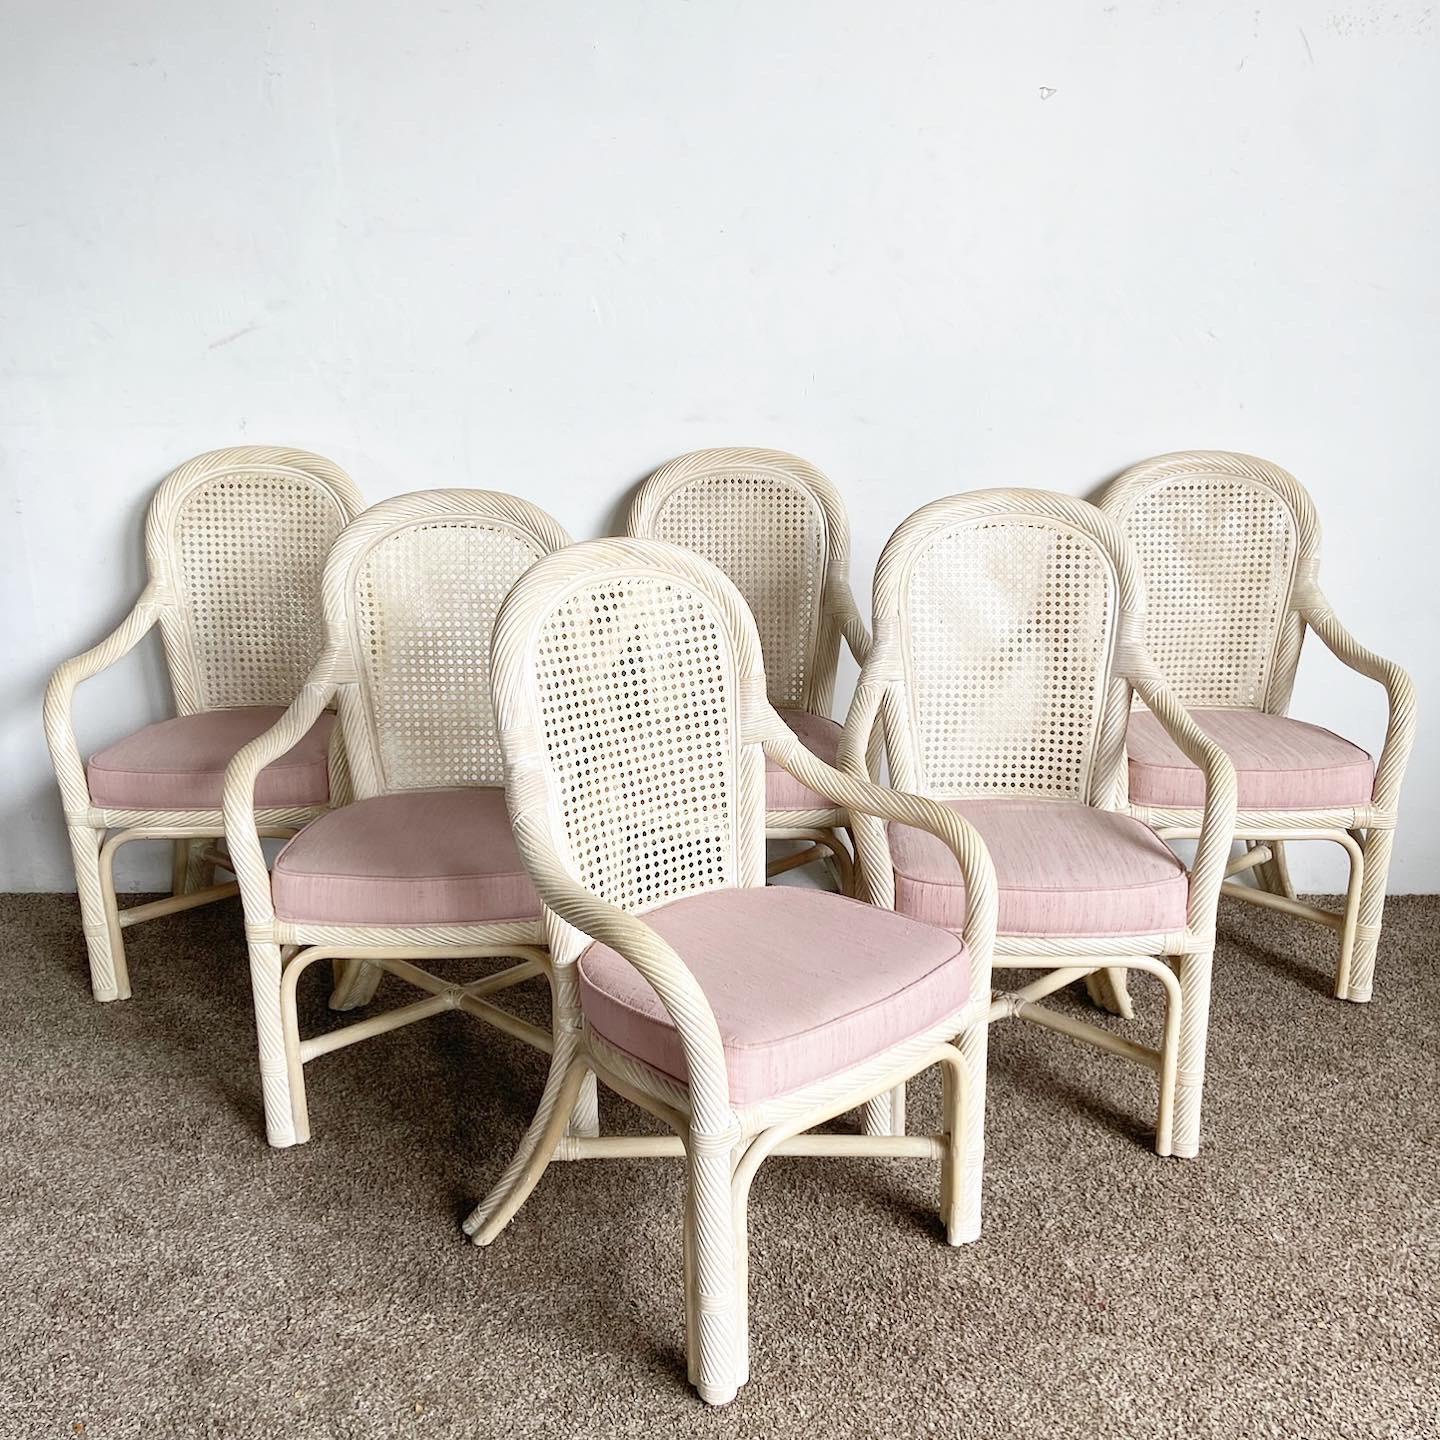 Our Boho Chic Twisted Pencil Reed Cane Back Dining Arm Chairs come in a set of six, offering an eclectic charm with pink cushions and unique design.

Features a unique twisted pencil reed construction and cane back detailing.
Pink cushions provide a